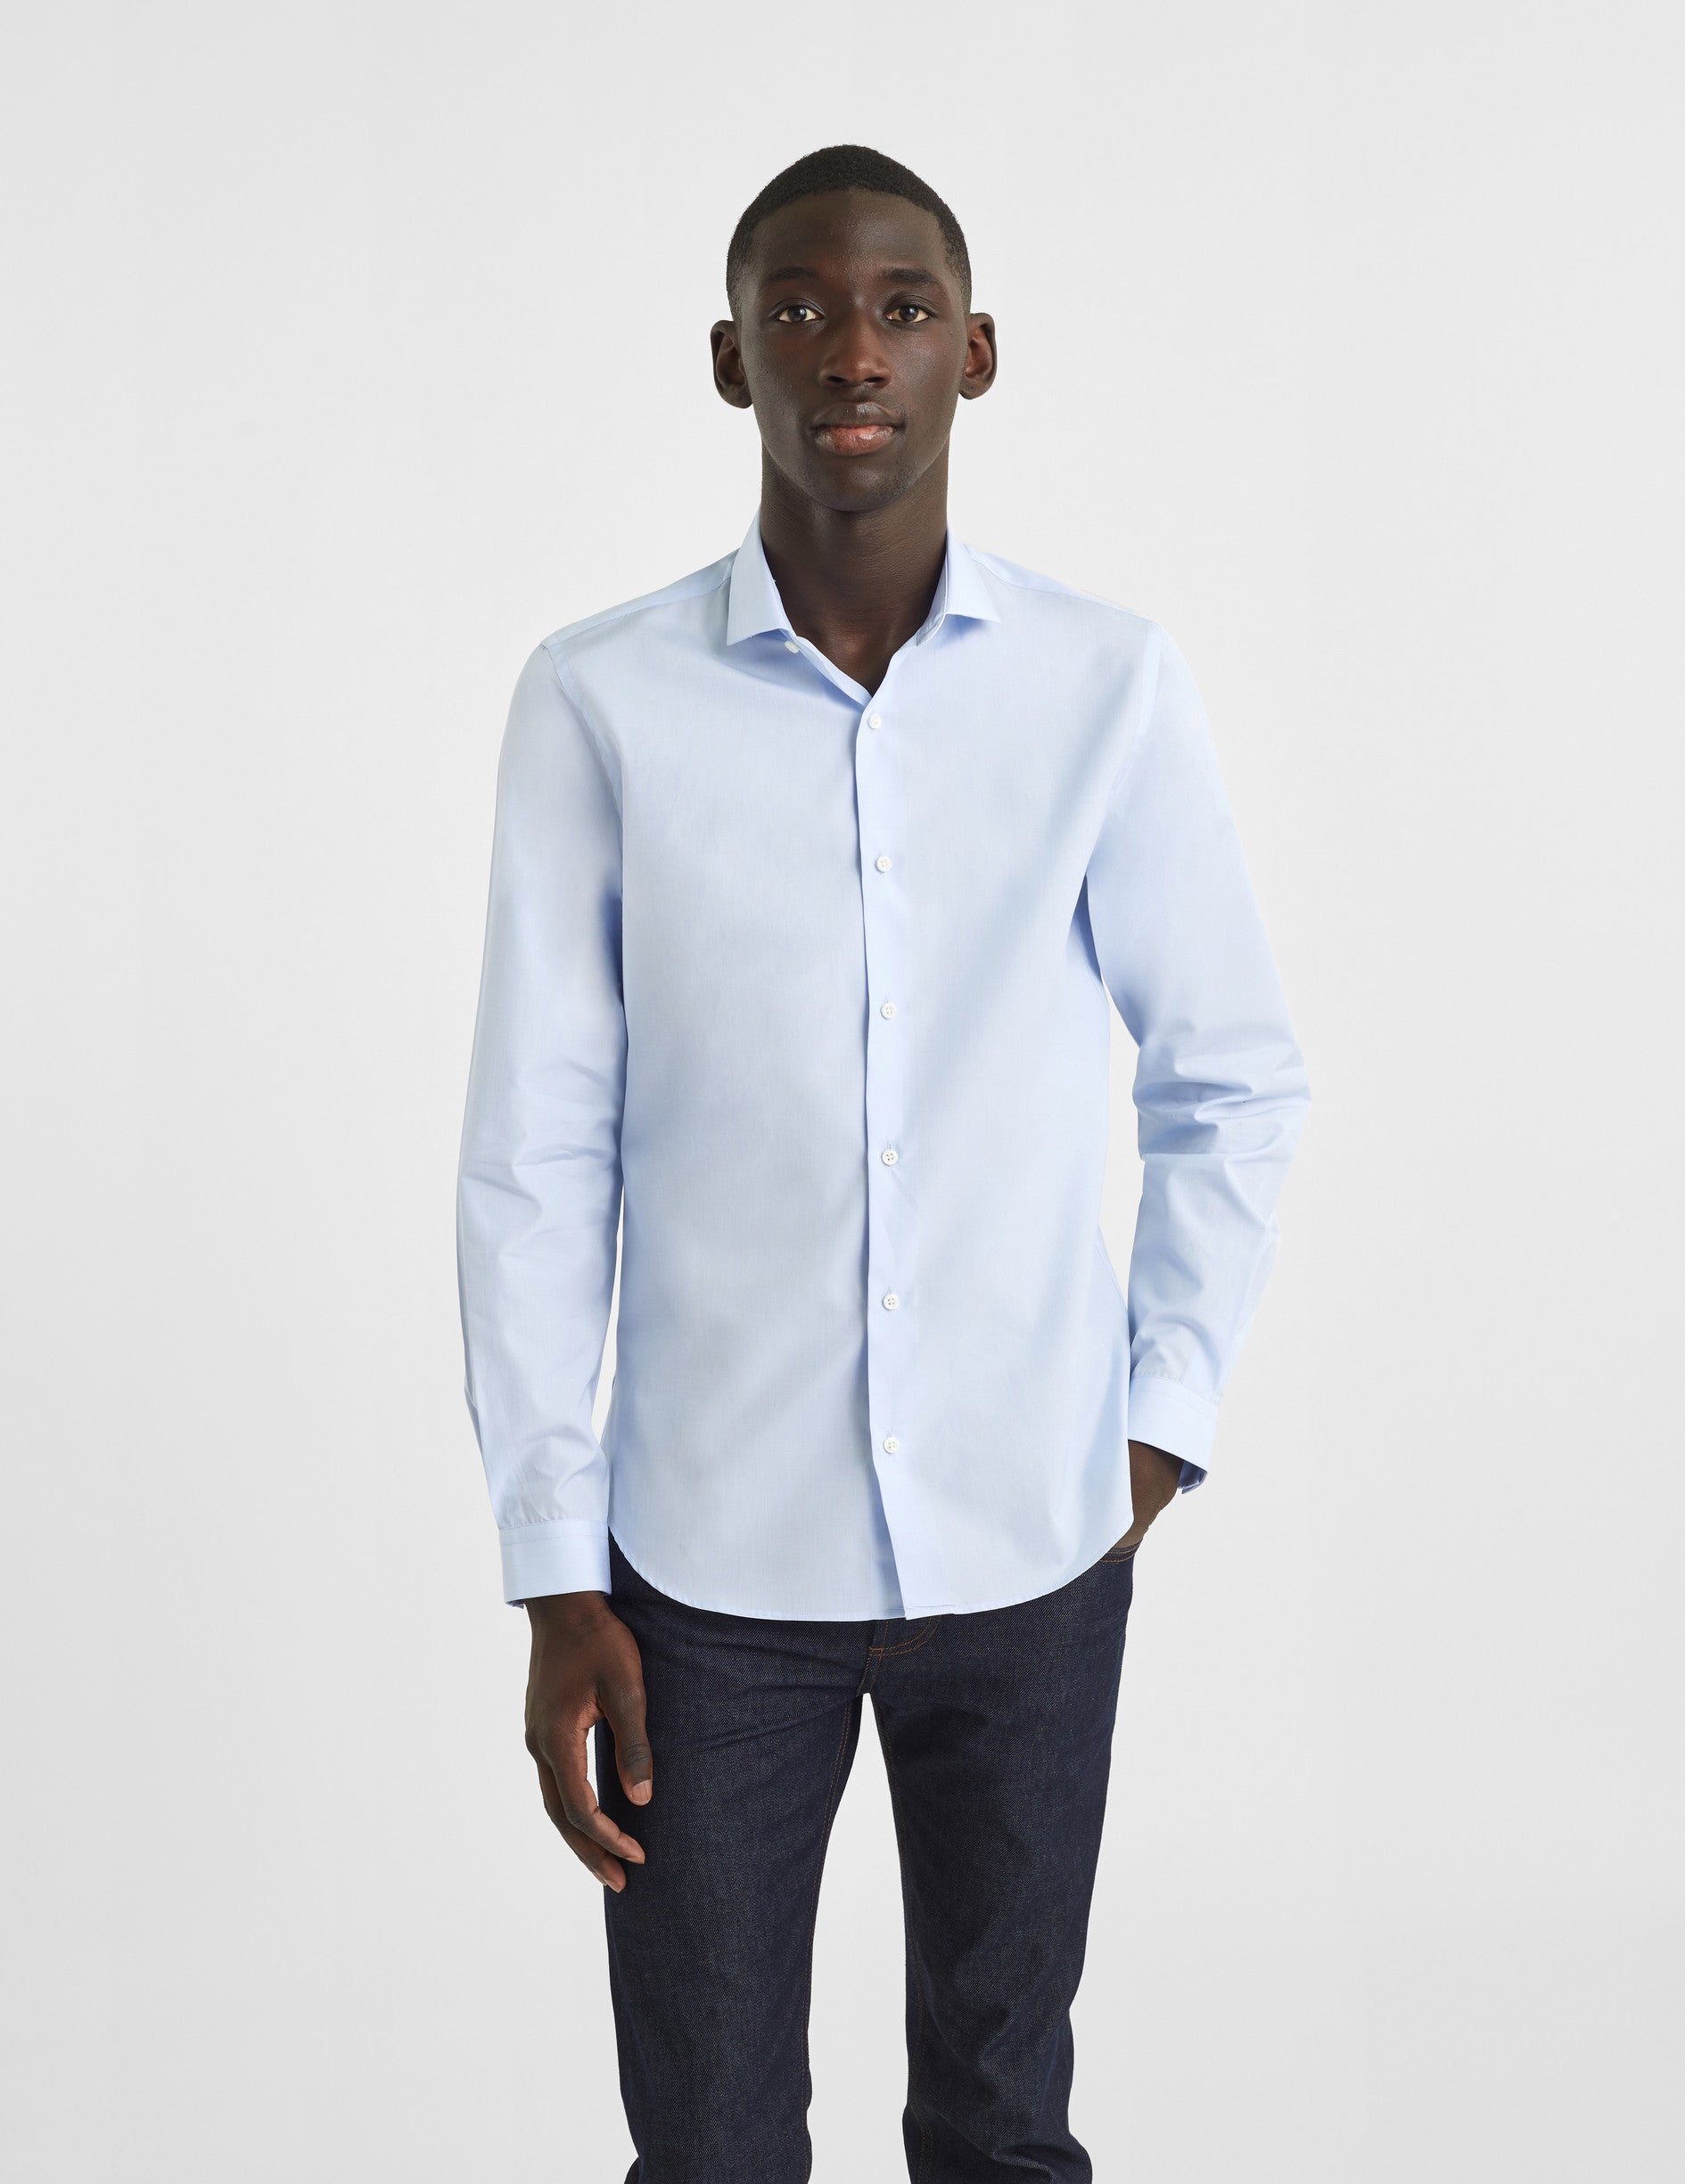 Fitted blue shirt - Wire to wire - Thin Collar